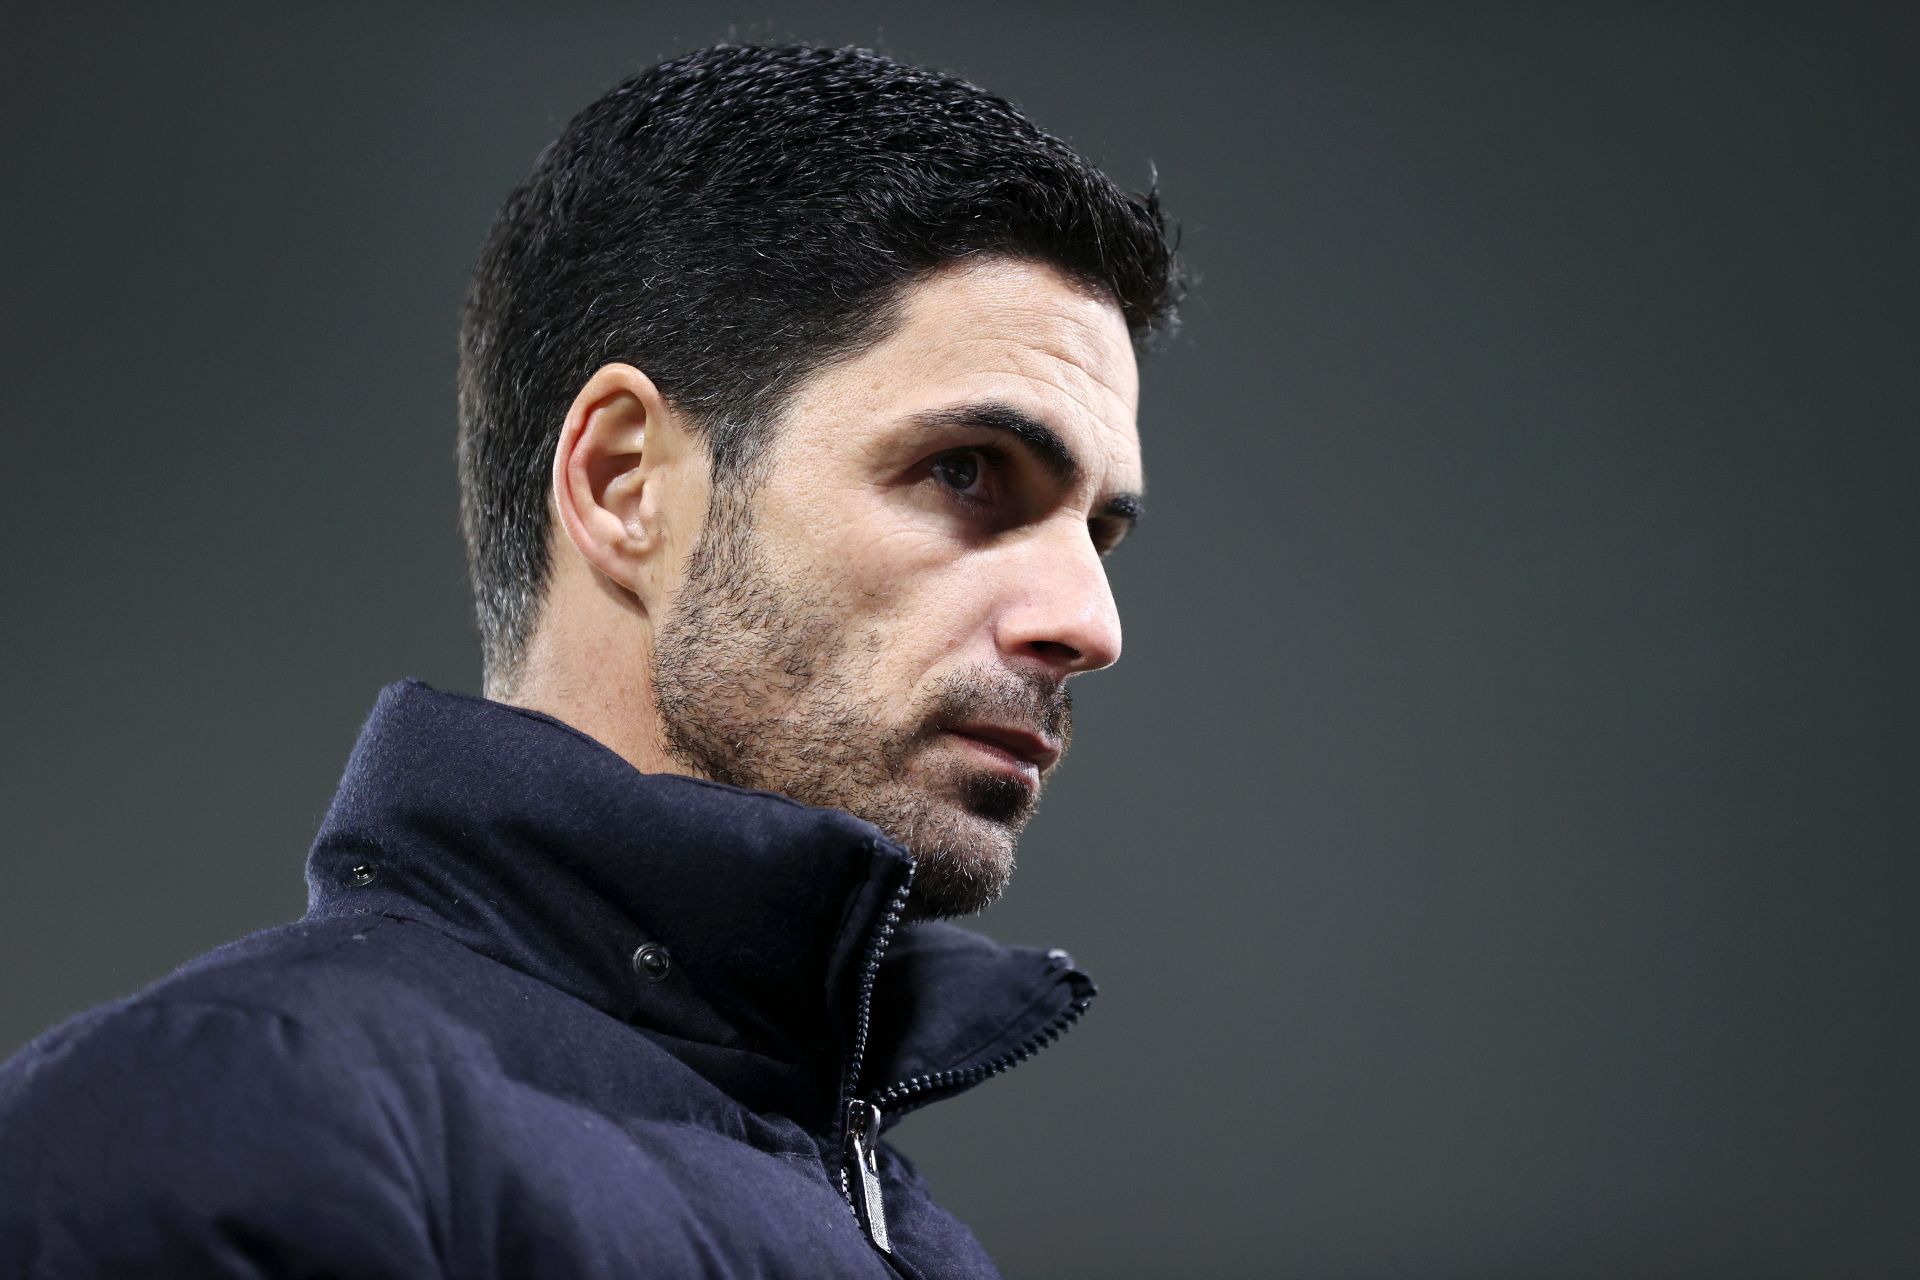 Arsenal manager Mikel Arteta has taken the Gunners to fourth in the Premier League.